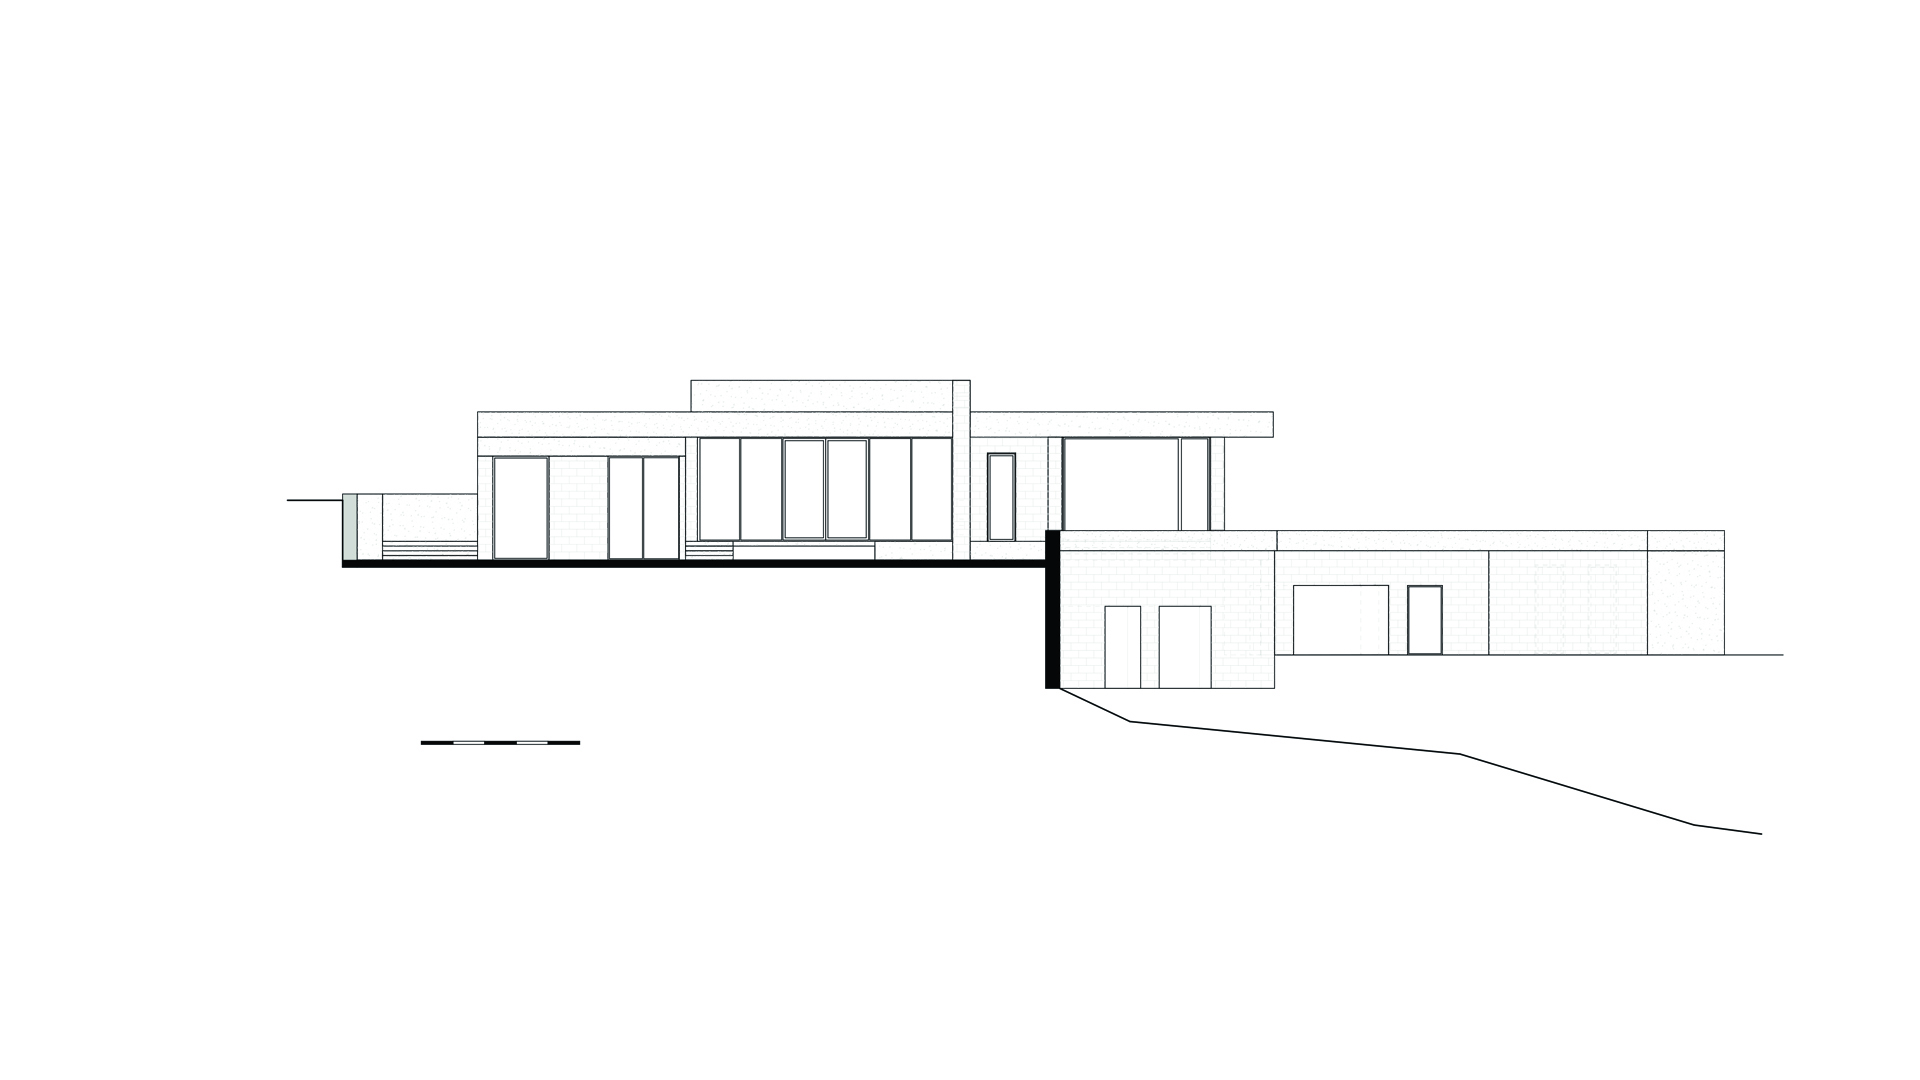 the layout of the house